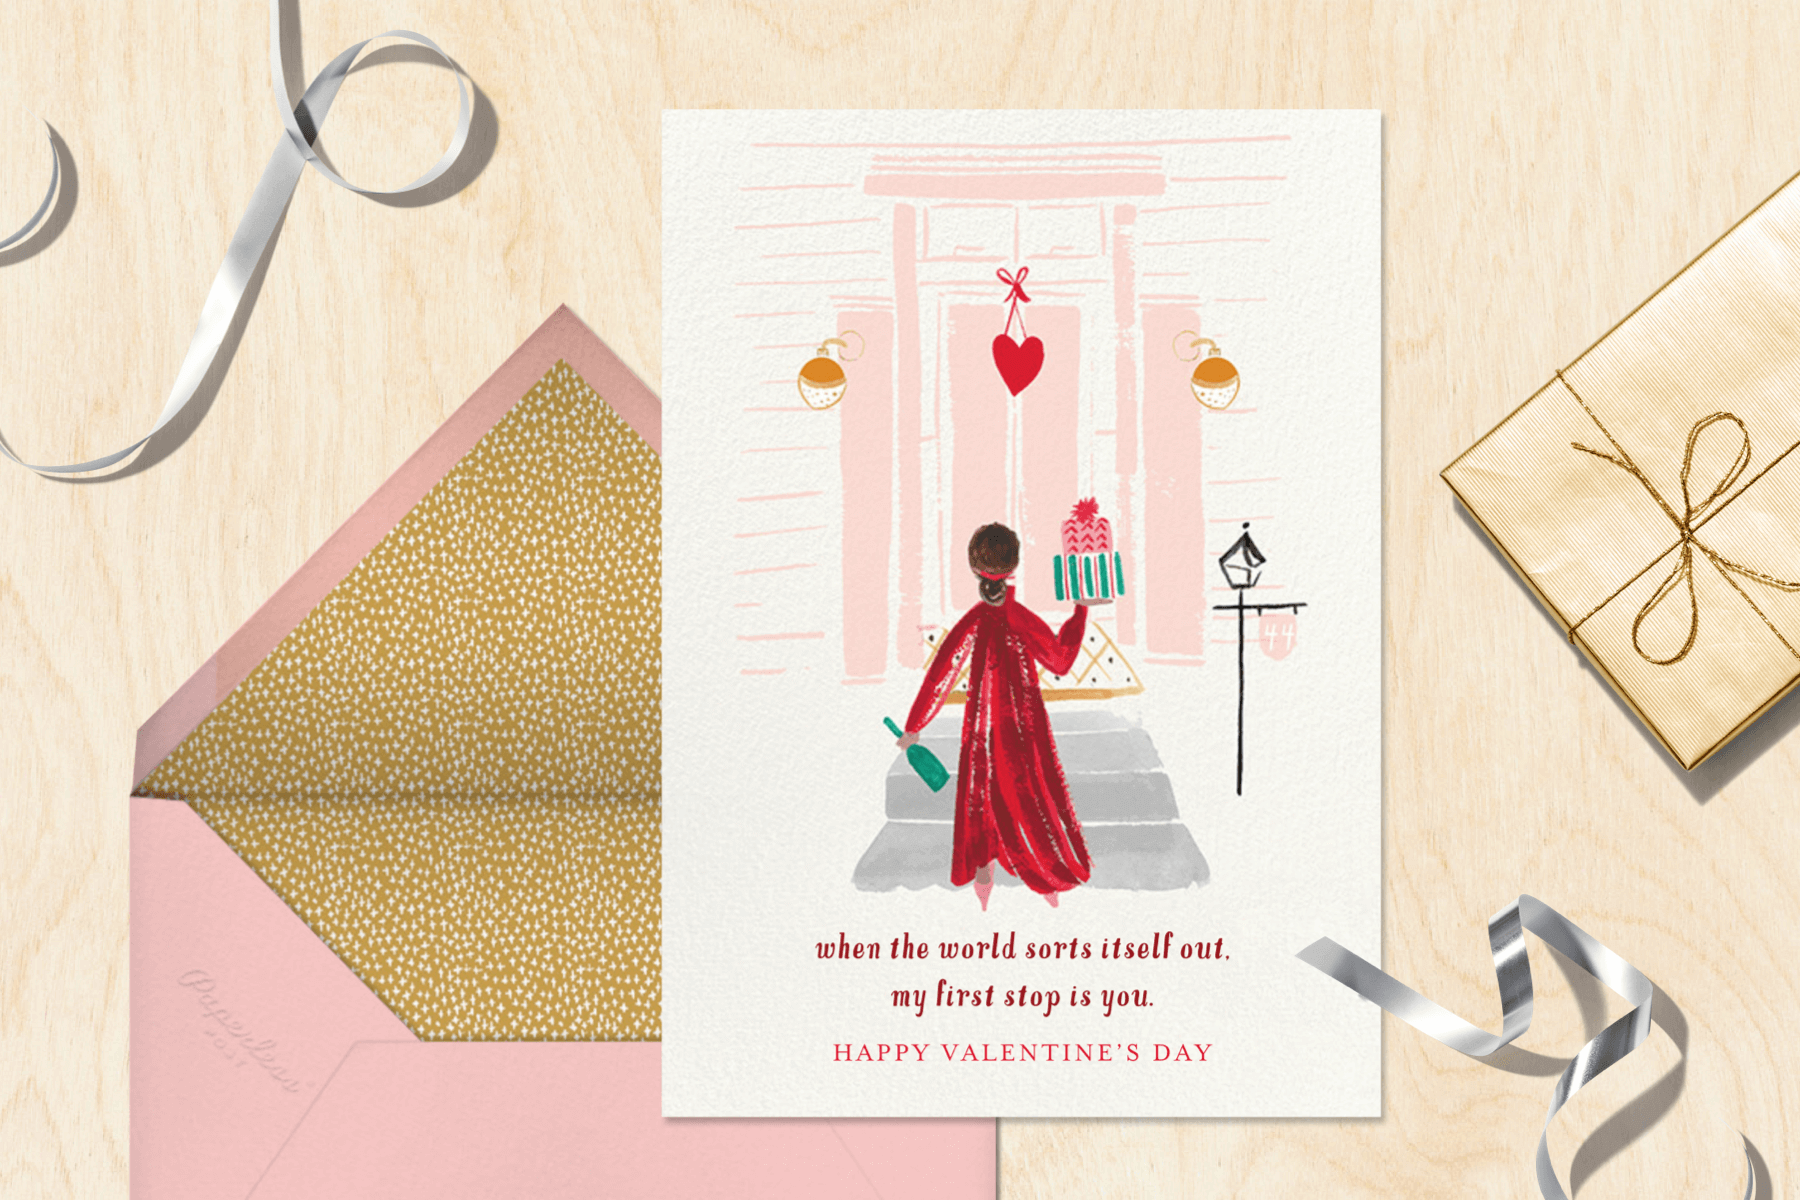 A Valentine’s Day card with a woman arriving to a party with a present.